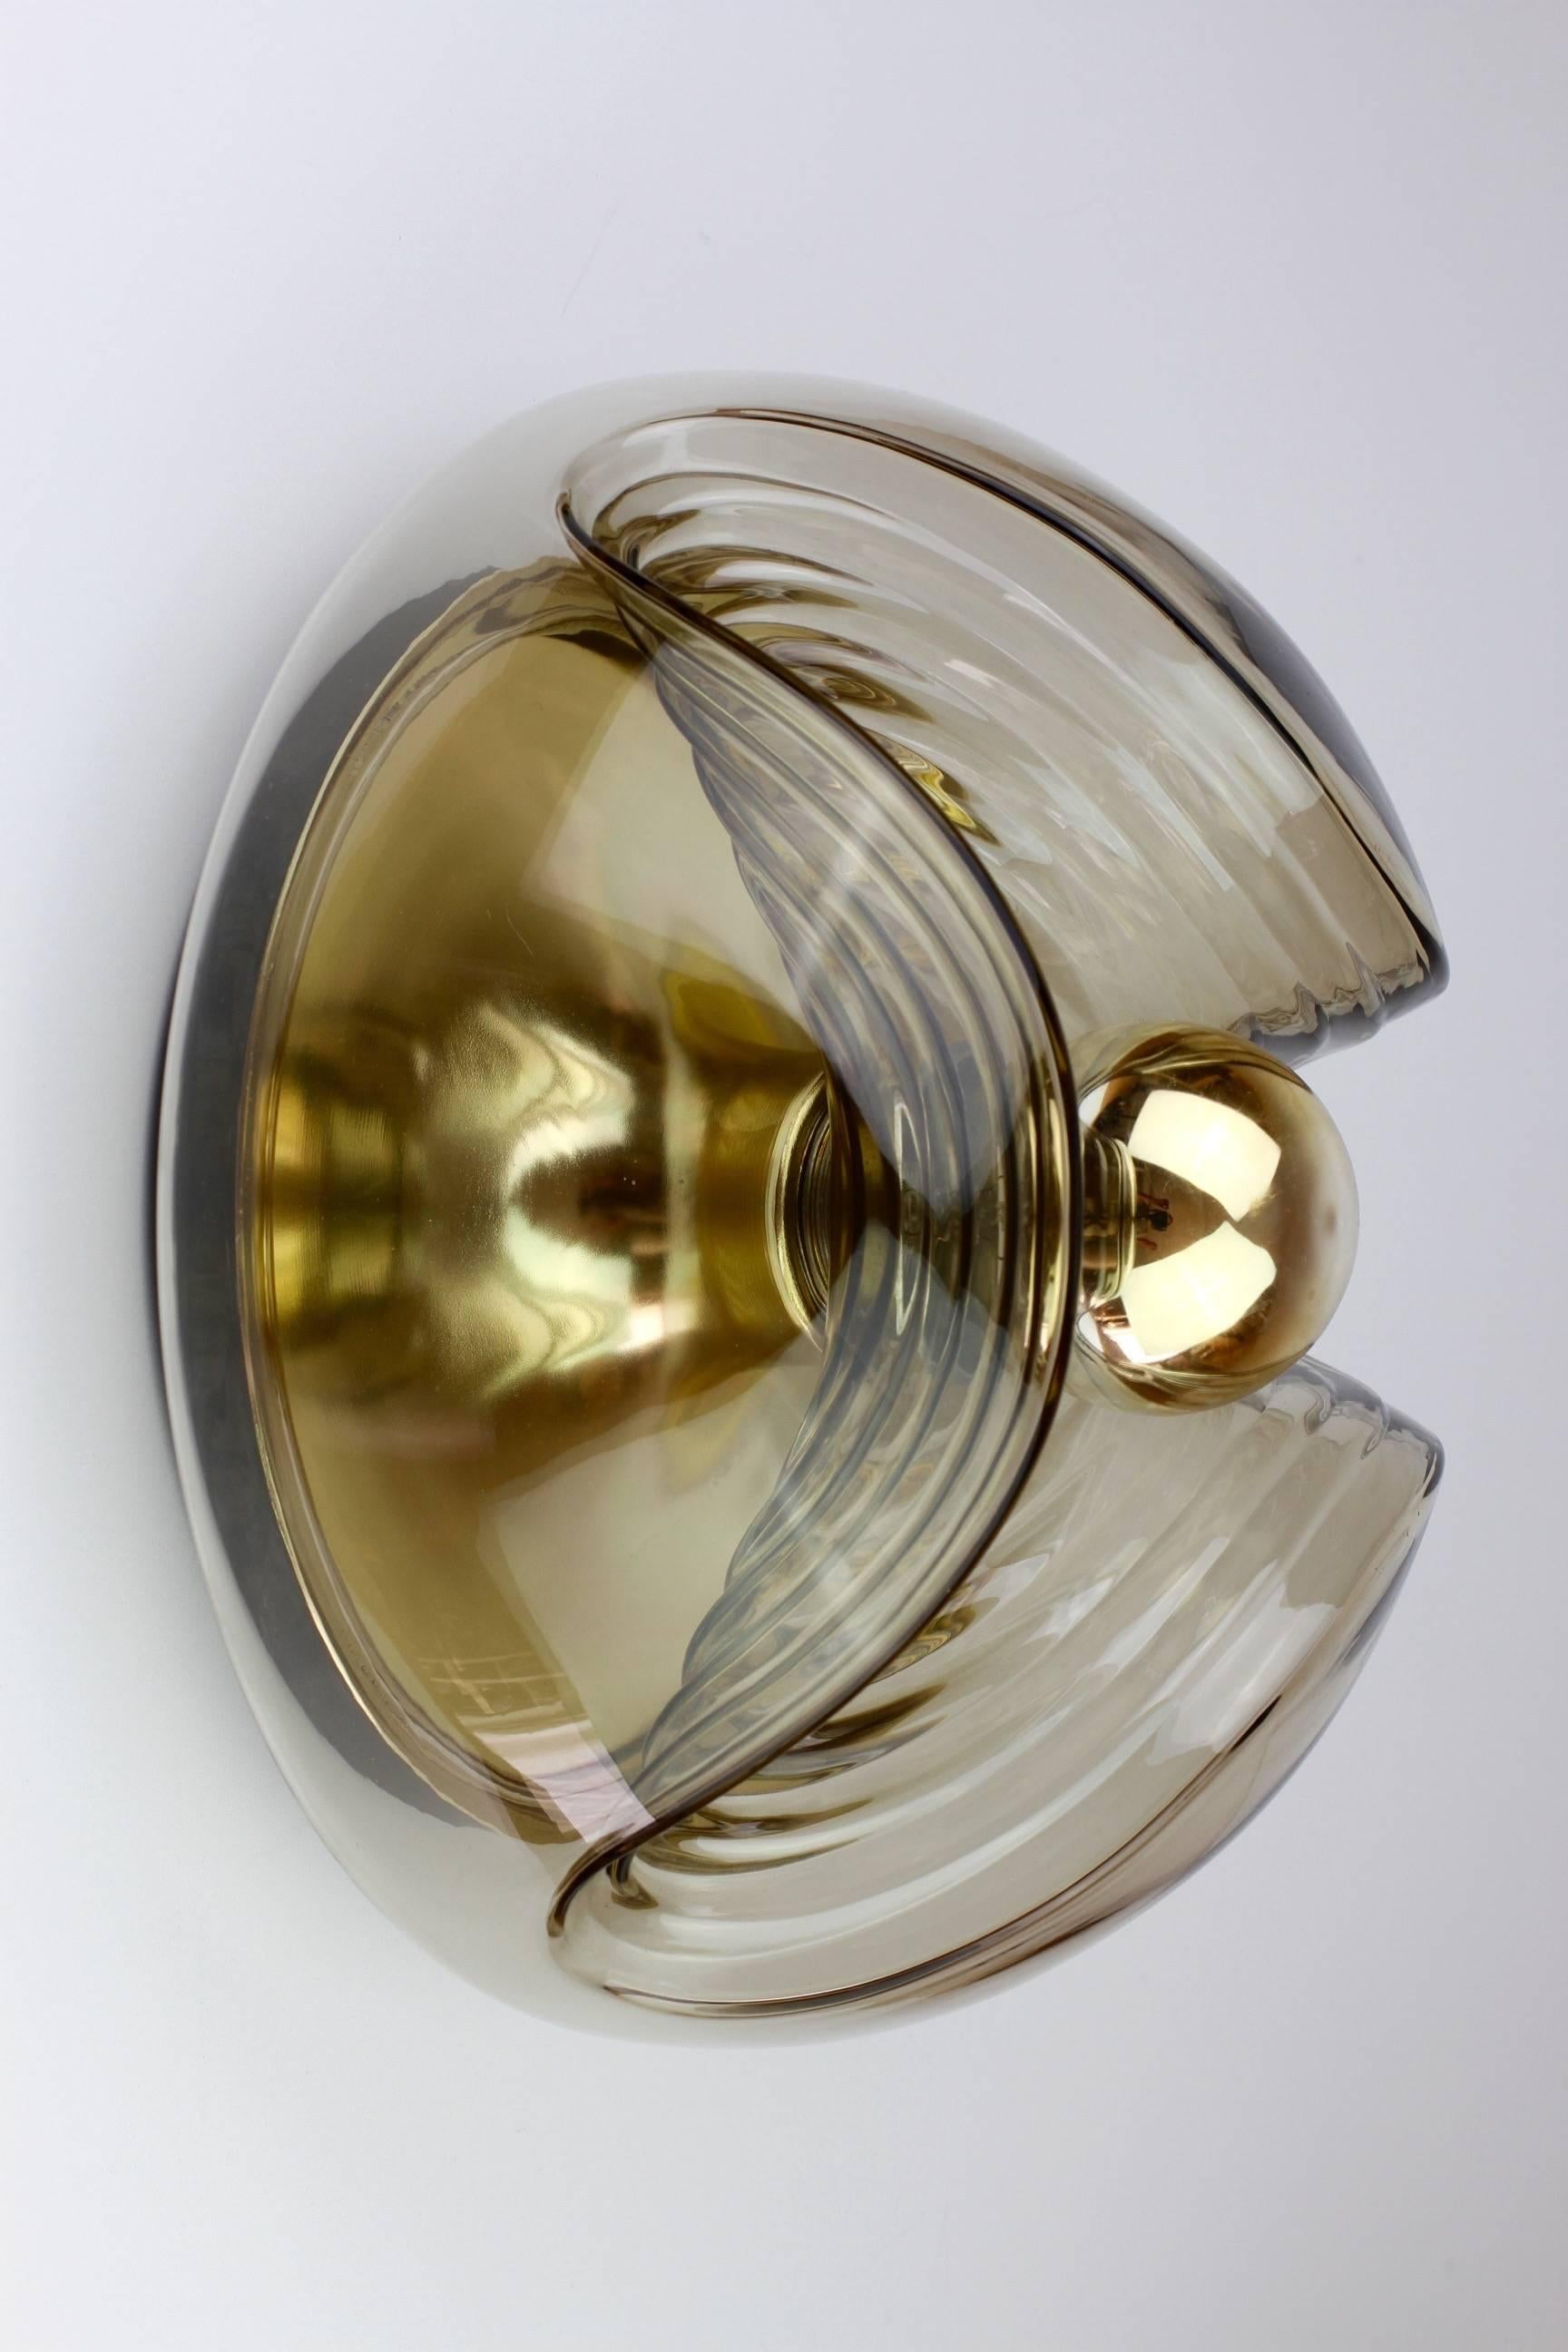 Three Mid-Century flush mount wall lights or sconces designed by Koch & Lowy for Peill & Putzler in the 1970s. This is an absolutely classic piece of design, featuring a smoked colored (colored) glass globe shade with a waved/ribbed molded bubble